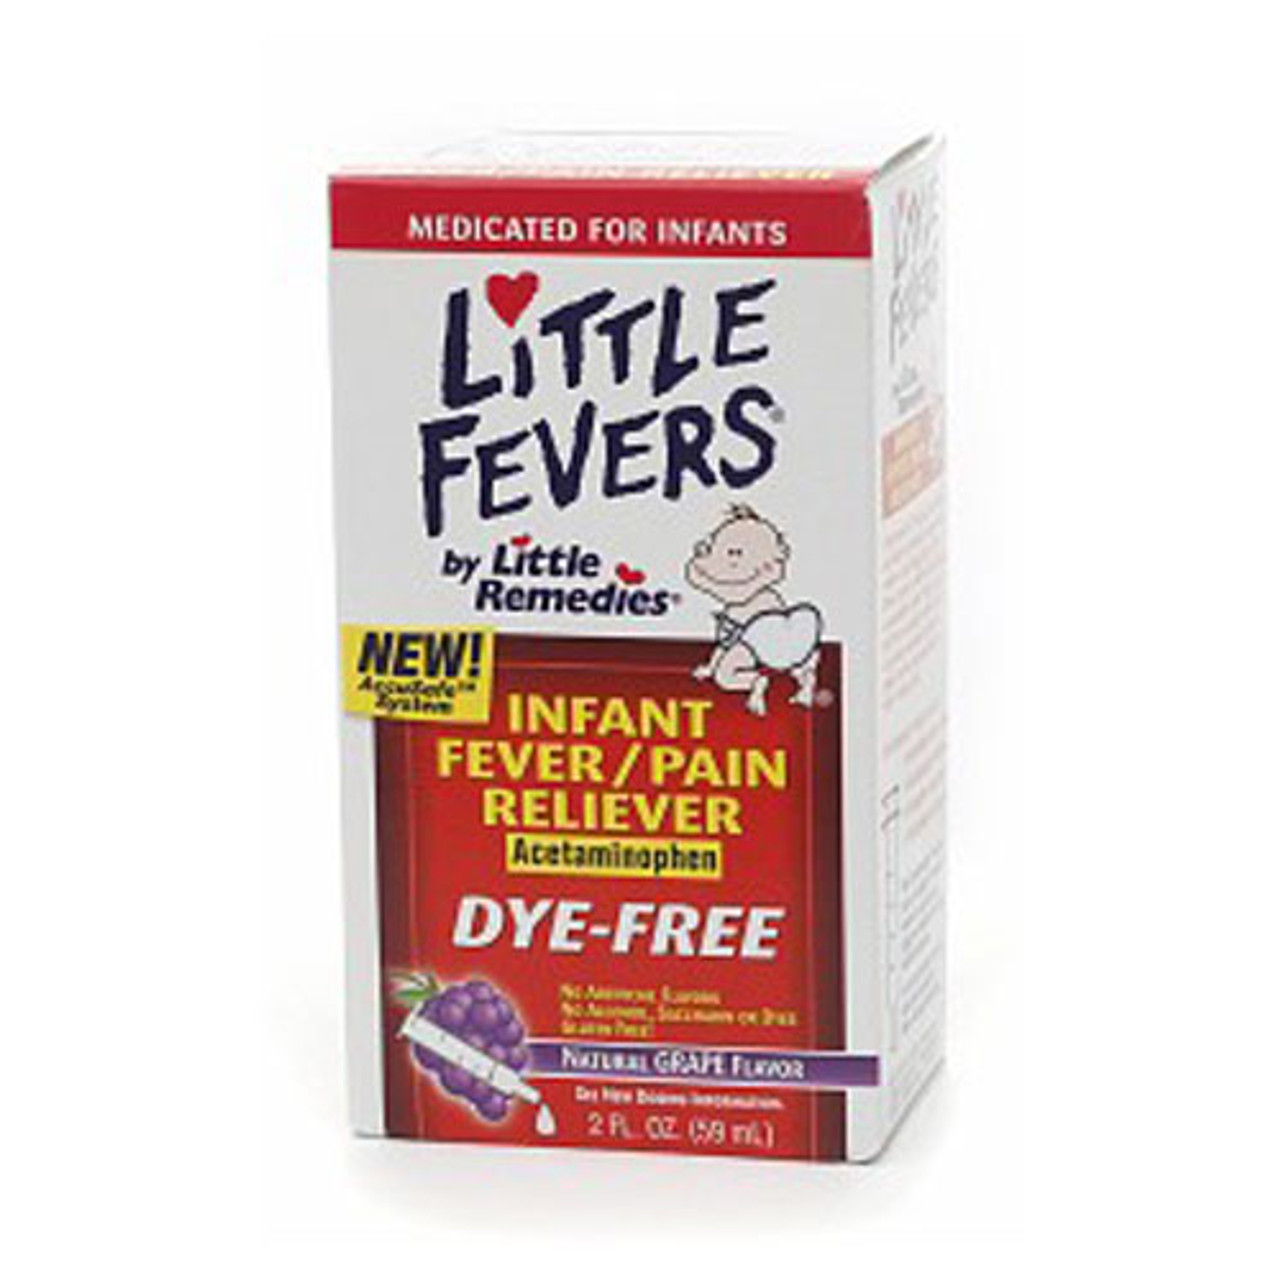 Little Remedies Fever And Reliever Dosage Chart